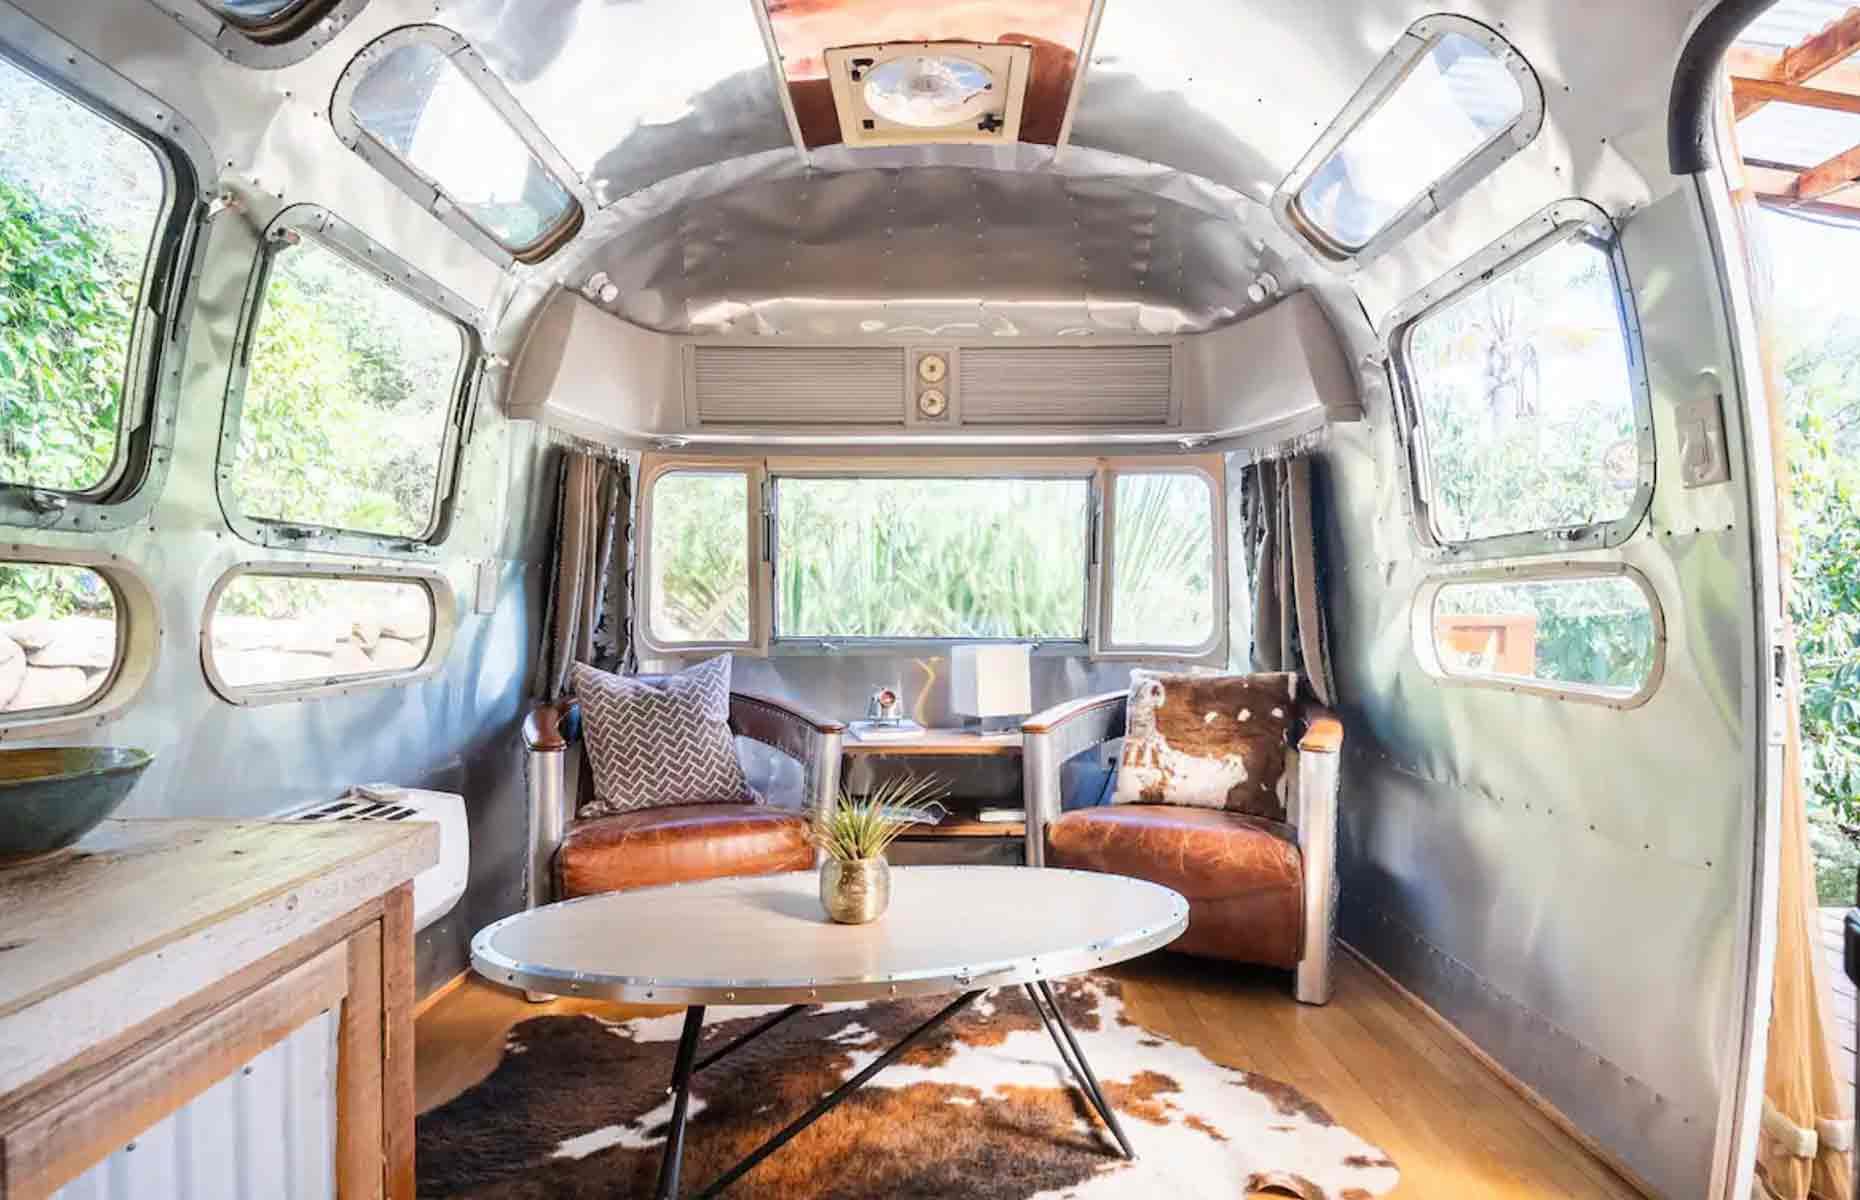 <p>At one end of the <a href="http://www.airbnb.co.uk/rooms/20068886">Airstream</a>, you'll find a double memory foam bed, while at the other there's a stylish seating area where you can kick back beneath that spectacular metal roof. Outside, a shady wooden deck with a gas firepit is the perfect place for dining alfresco.</p>  <p>There's also a separate structure containing a full bathroom and laundry facilities, alongside a beautiful garden and even a small avocado orchard. We can’t imagine ever wanting to leave this Cali hideaway!</p>  <p>Loved this? <a href="https://bit.ly/3B2v4H9"><strong>Follow us on Facebook</strong></a> for more amazing tiny homes!</p>